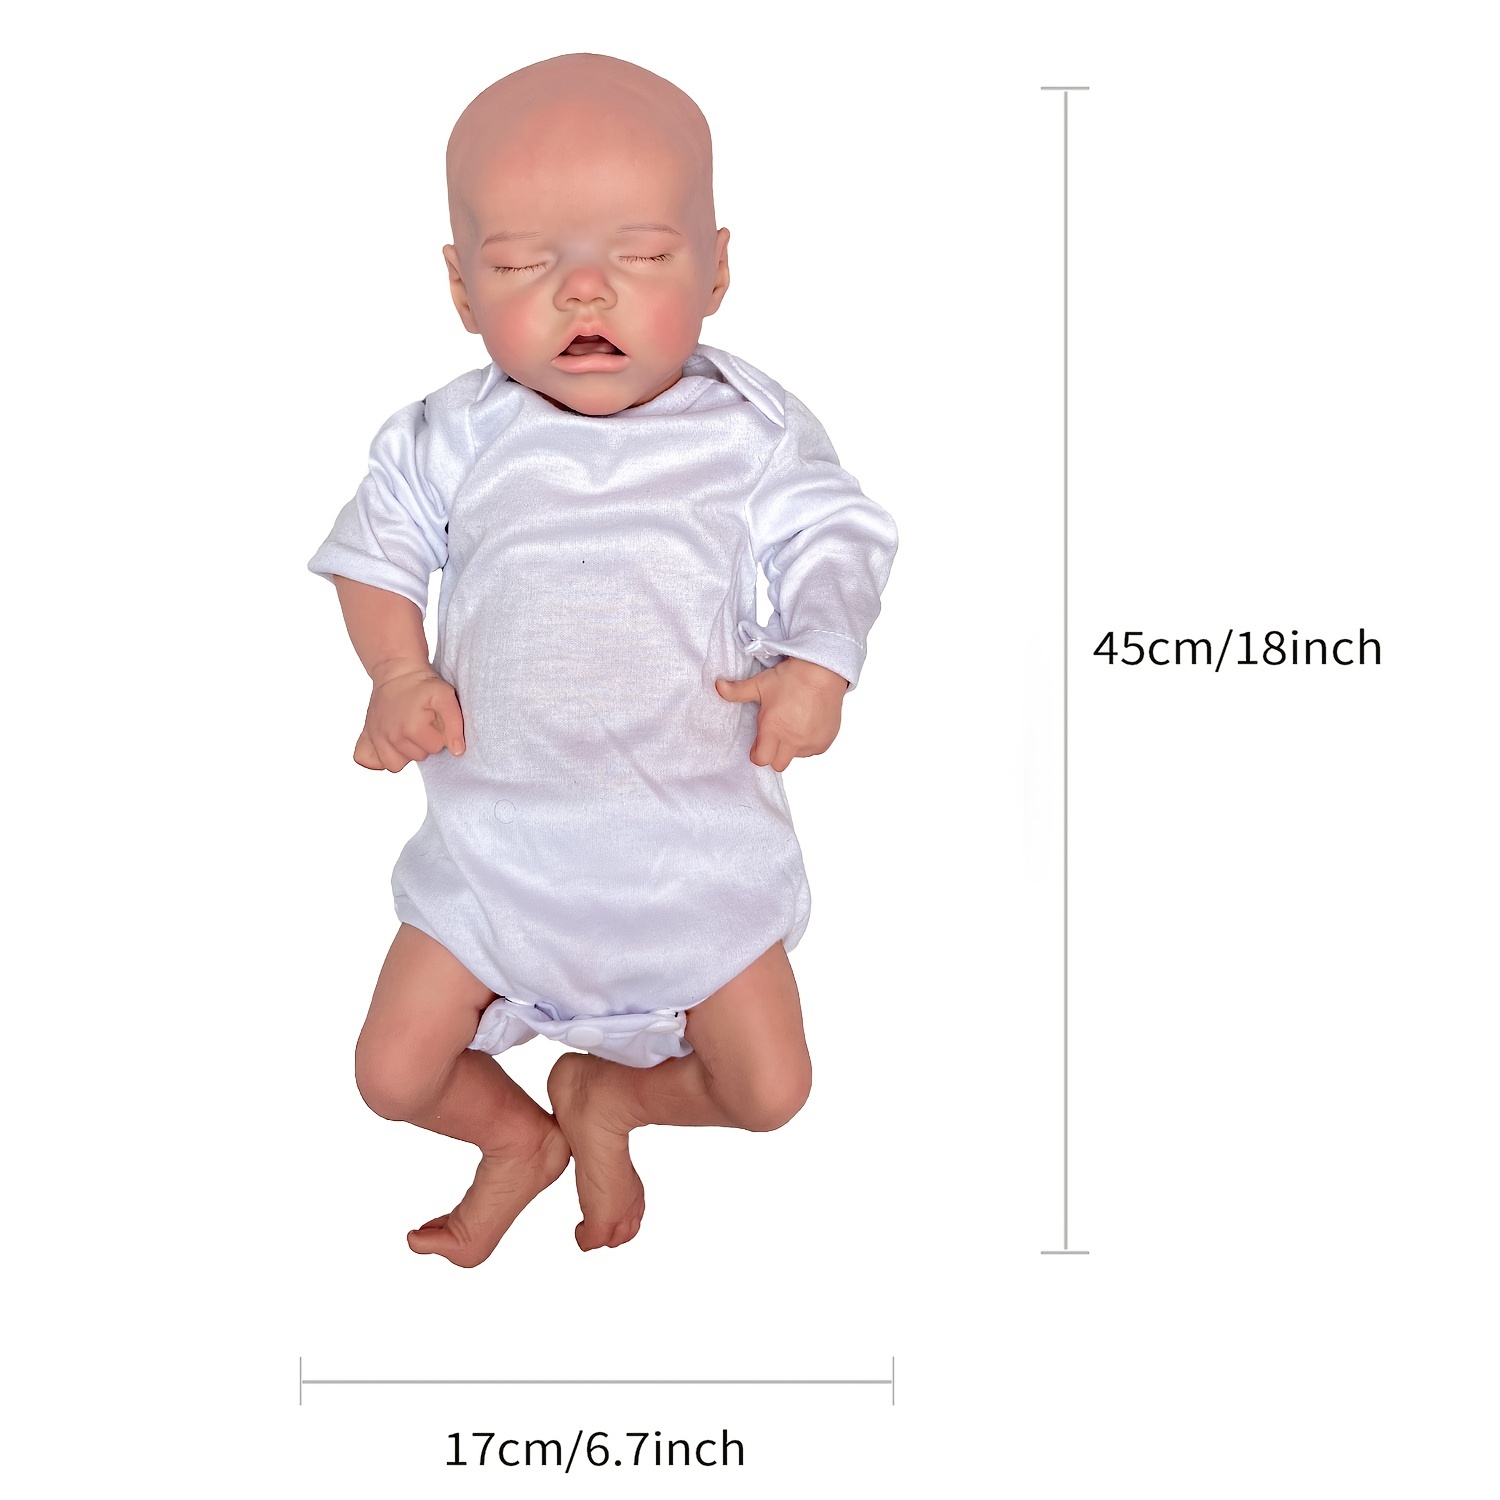 FULL BODY SILICONE Babies twins miniature boy and girl - All